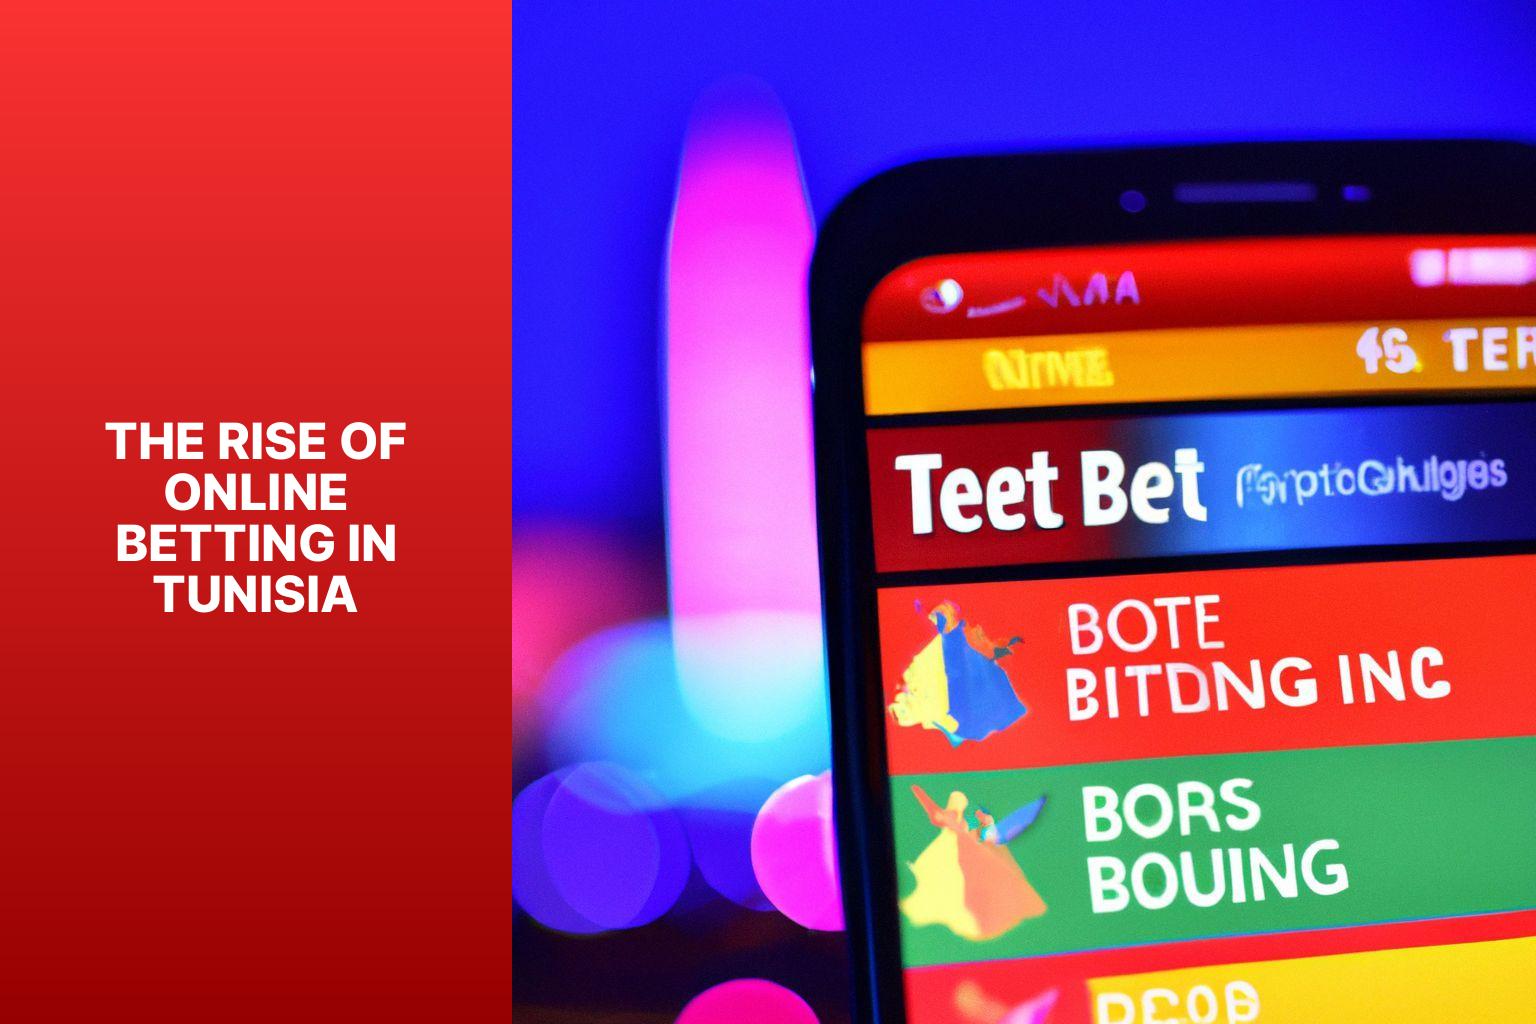 The Rise of Online Betting in Tunisia - Tunisa Bet: A Closer Look at Betting in Tunisia 